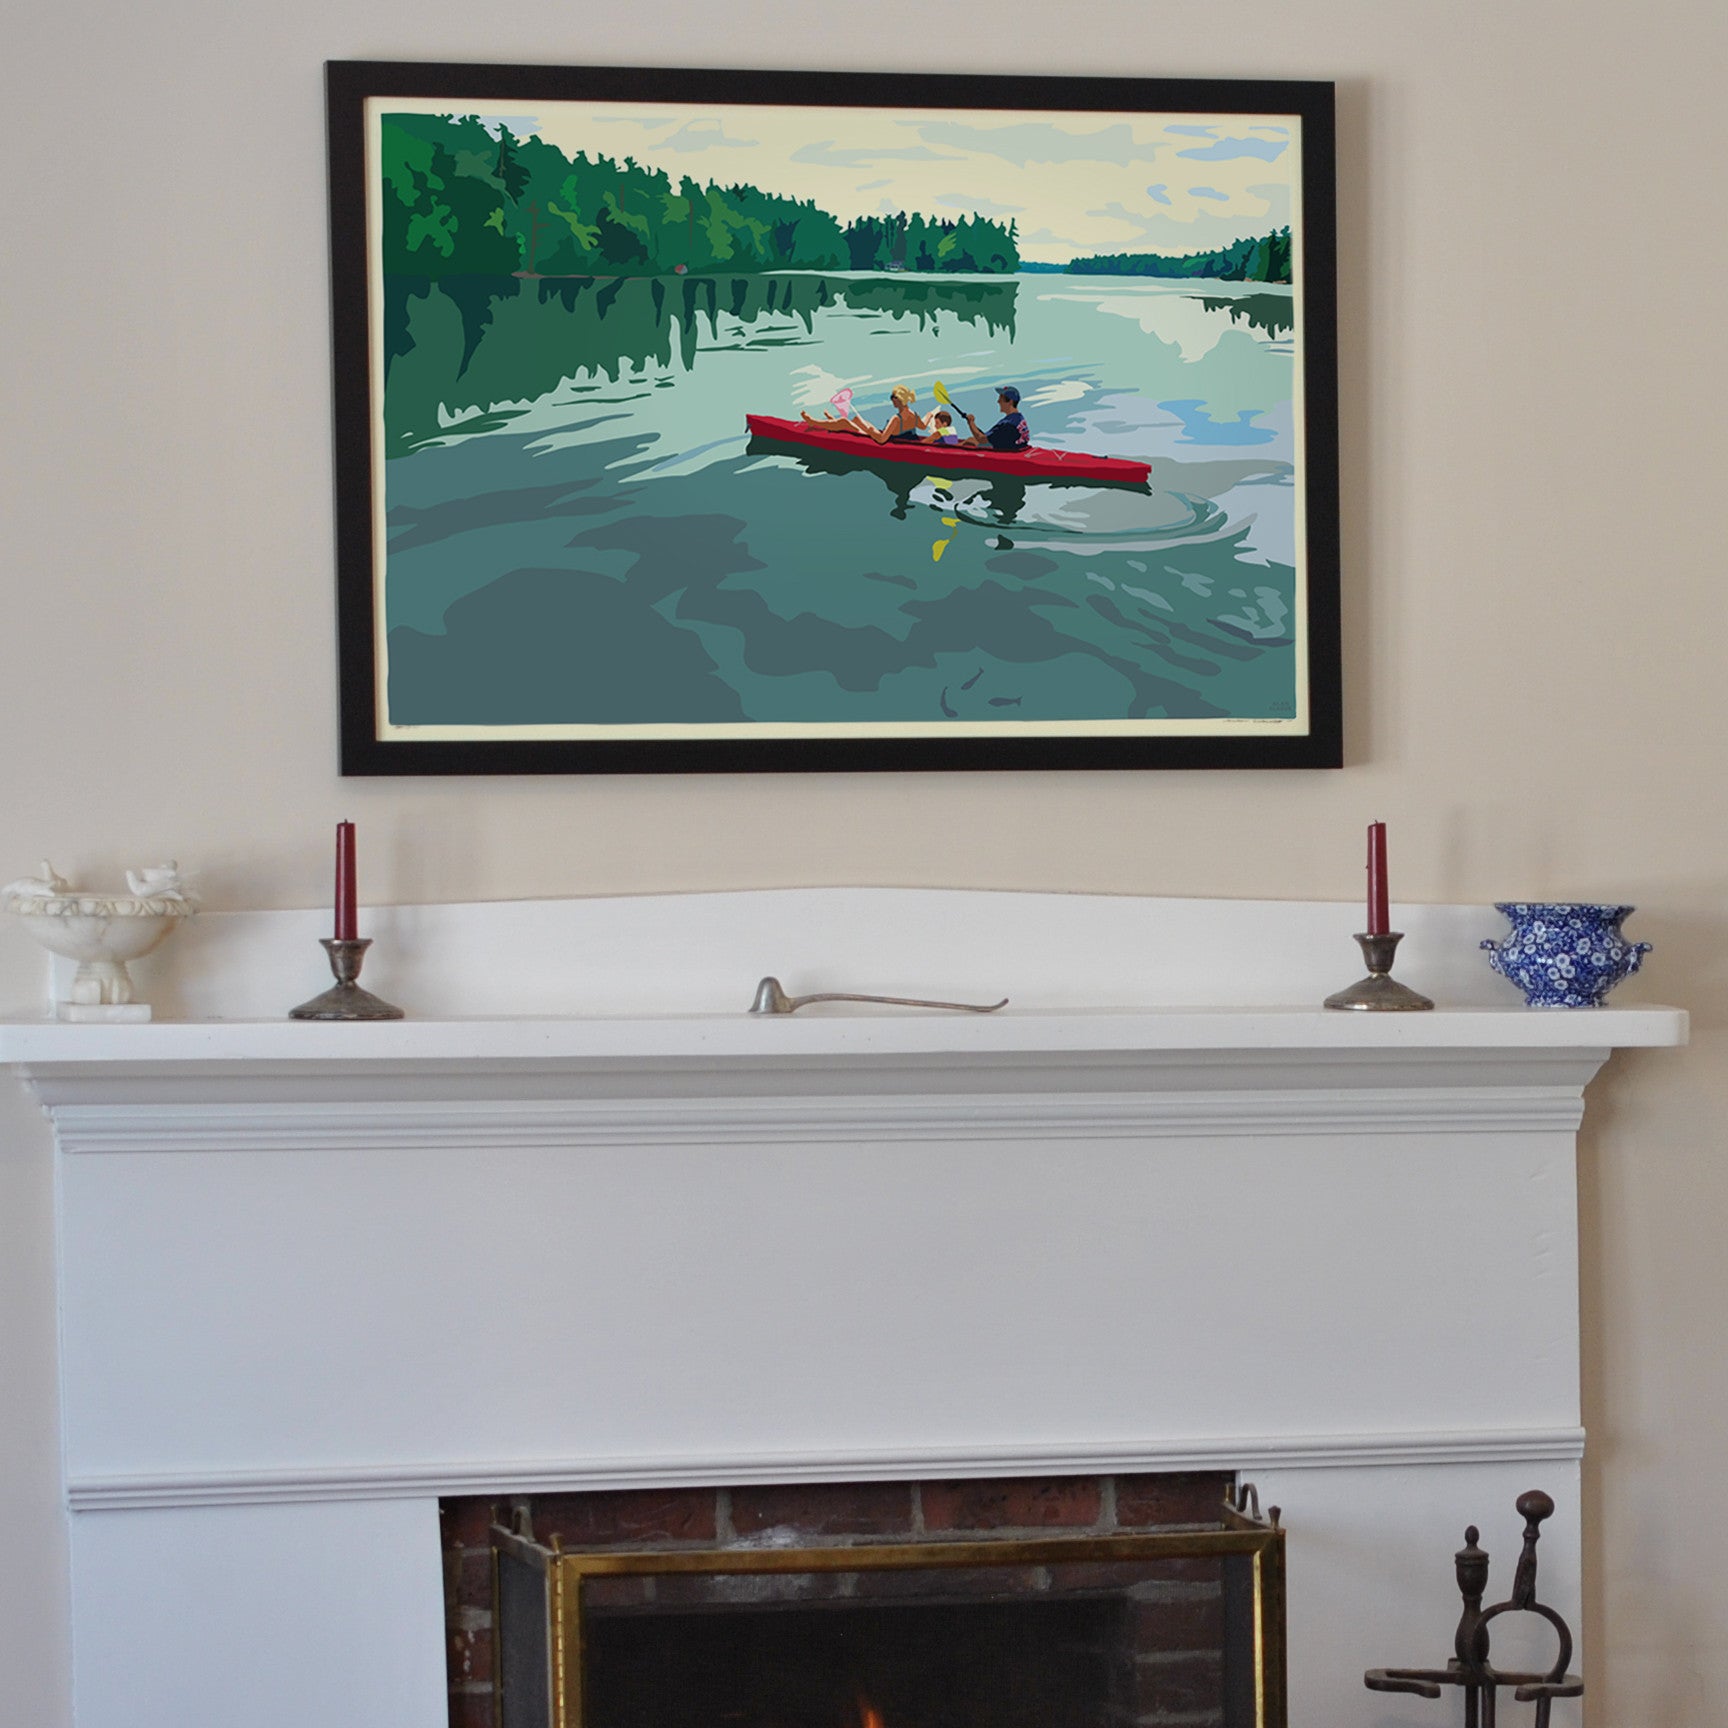 Kayaking On A Lake Art Print 24" x 36" Framed Travel Poster By Alan Claude  - Maine